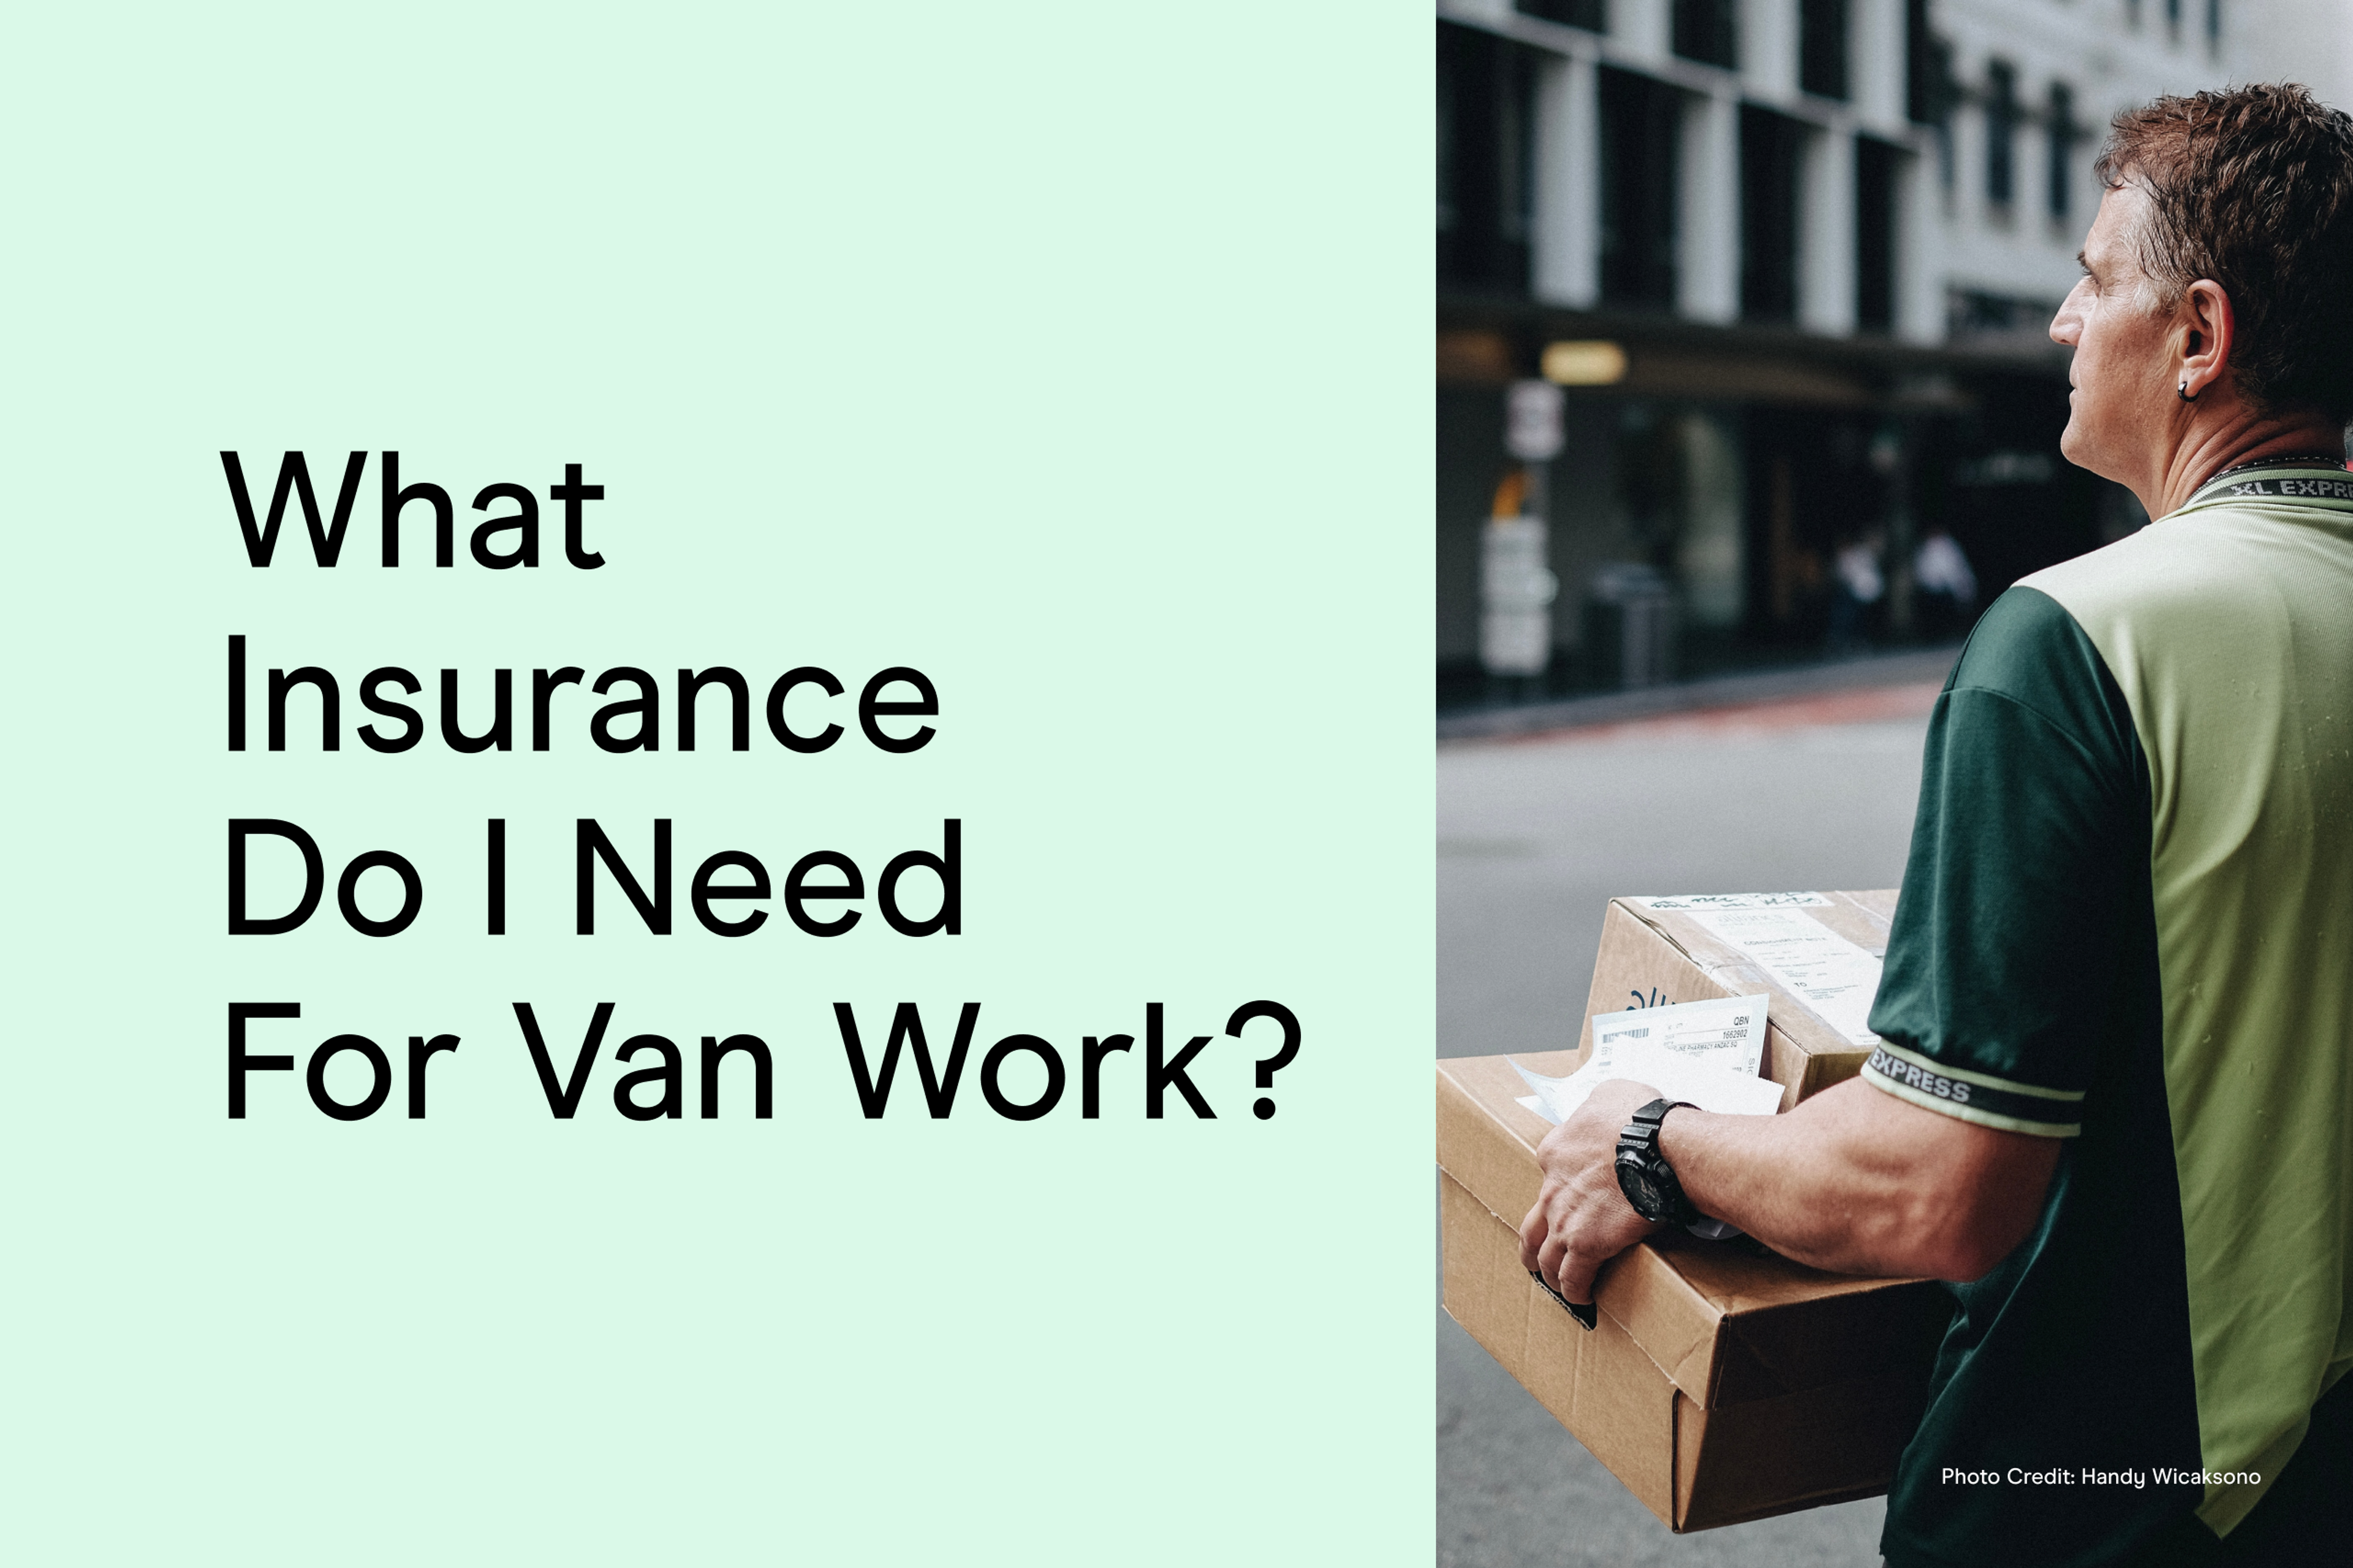 What insurance do I need for a work van?